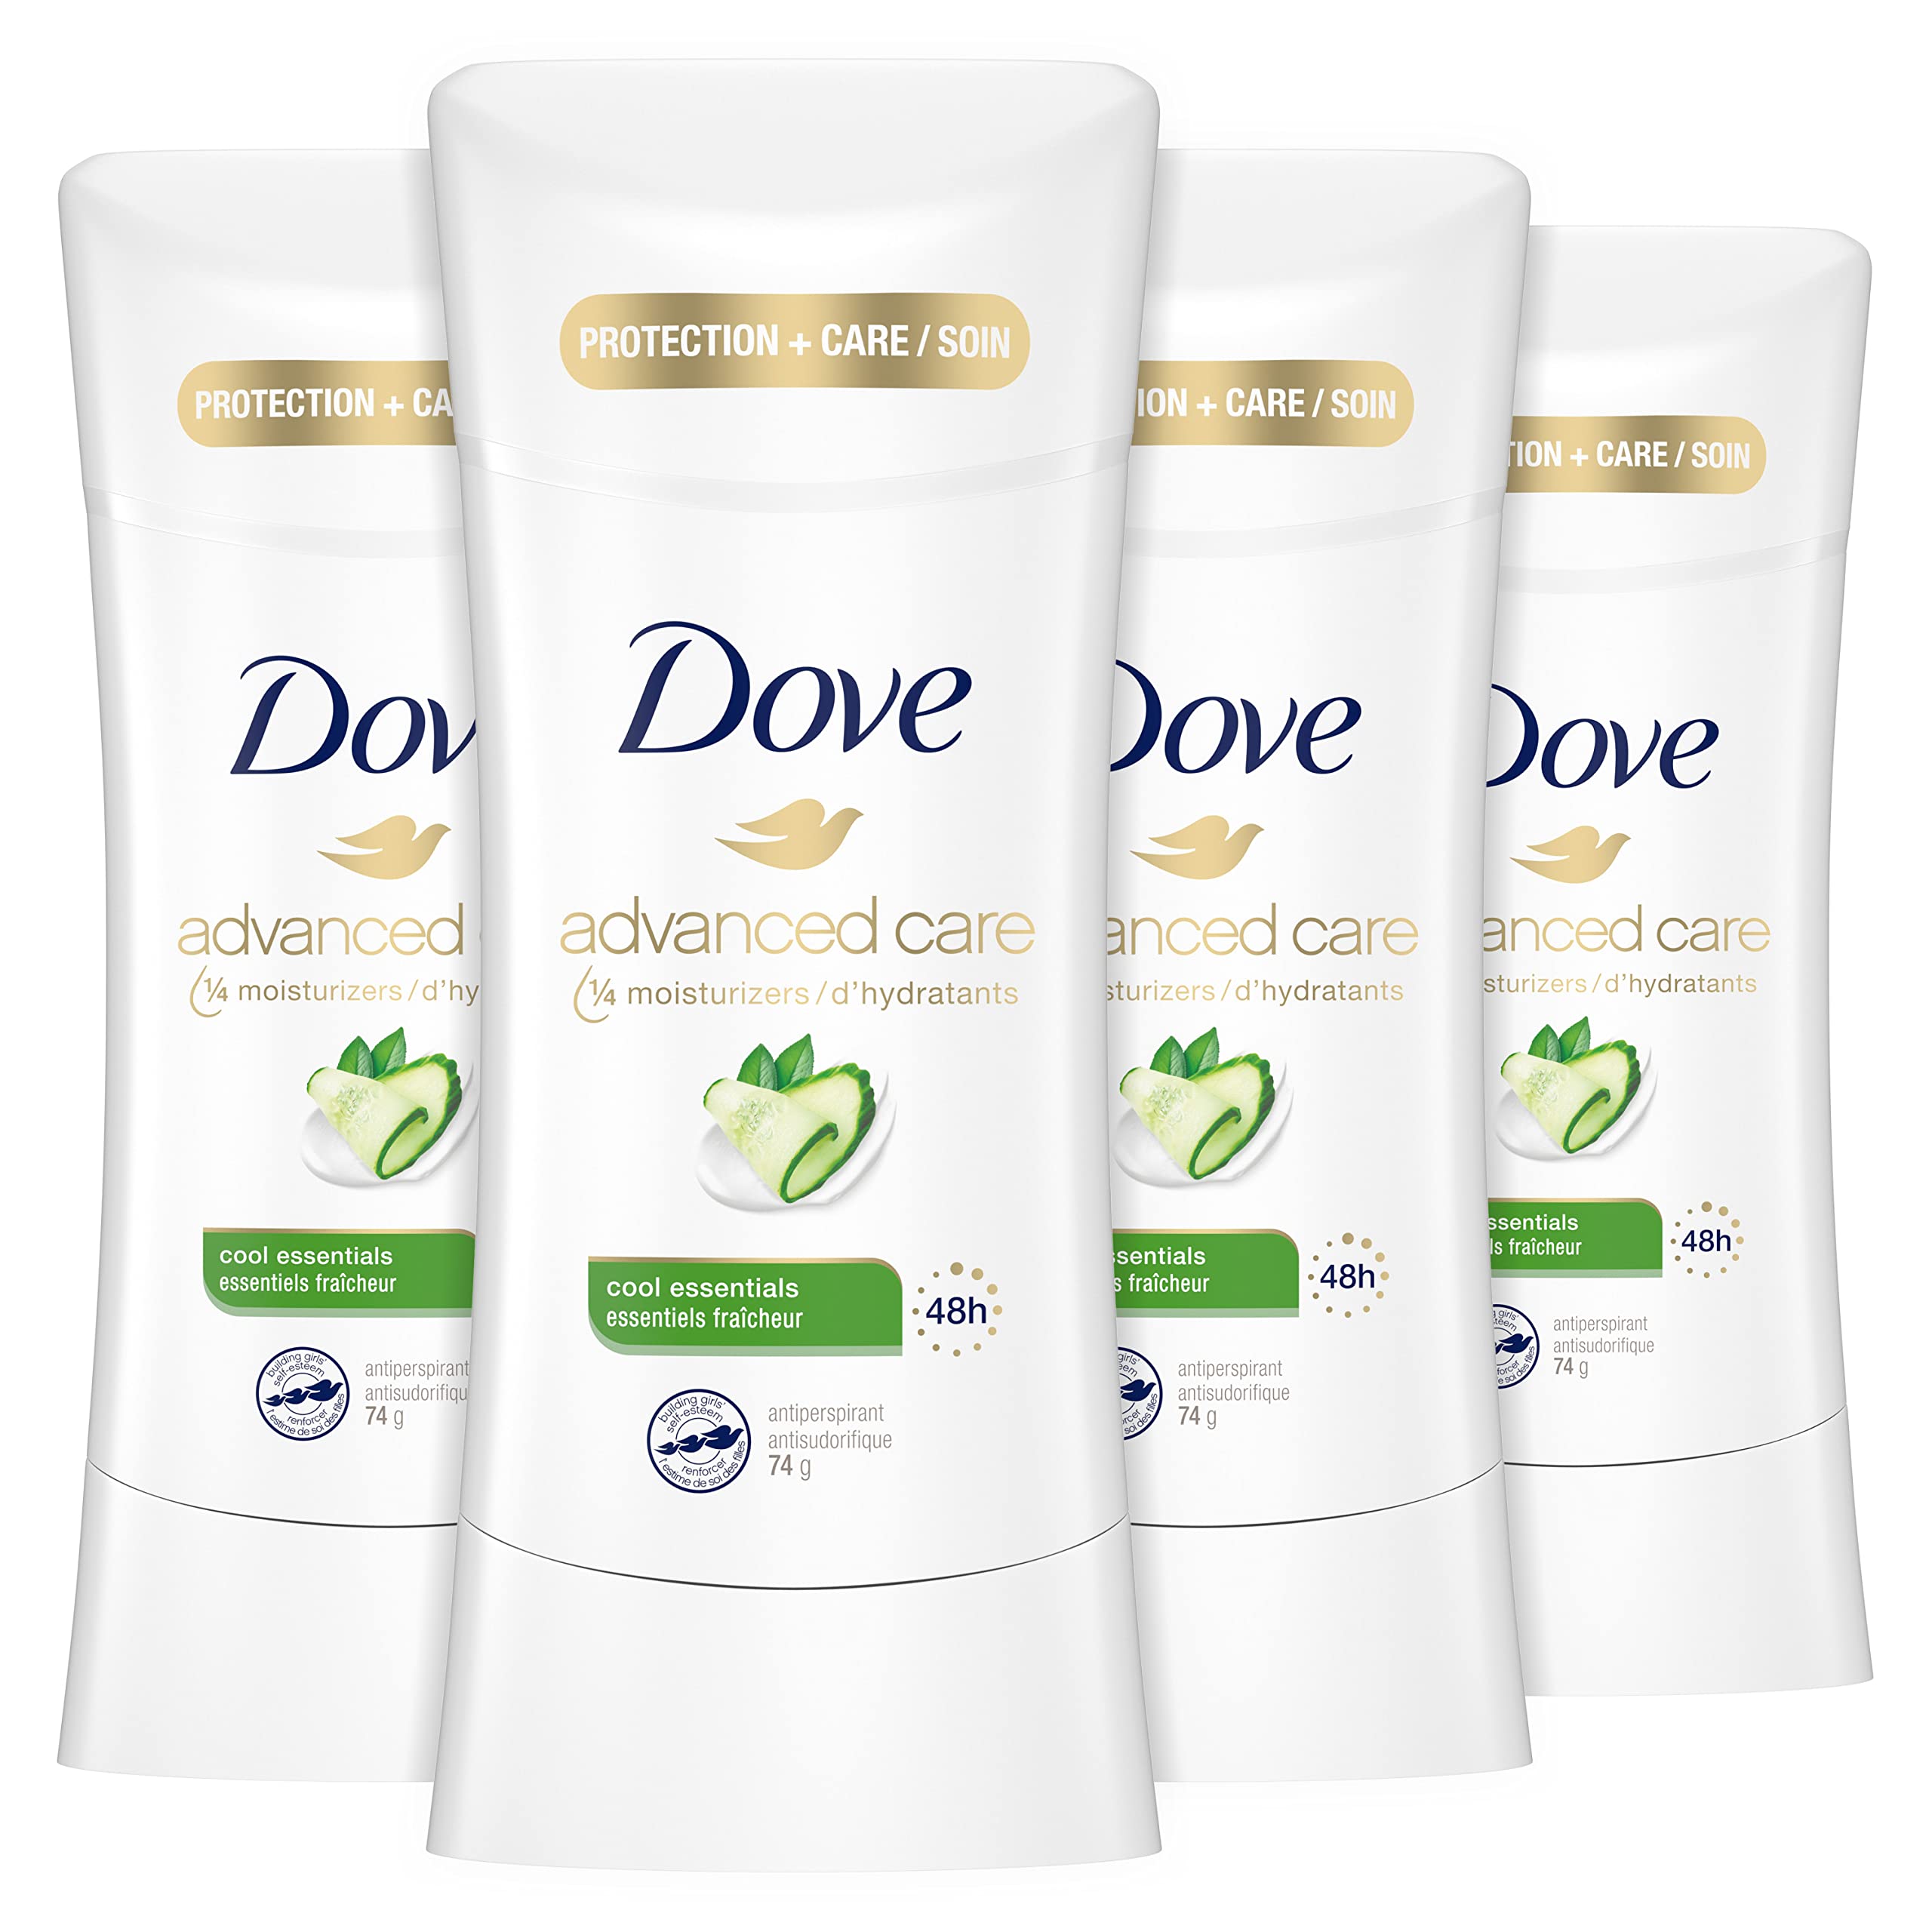 Dove Advanced Care Antiperspirant Cool Essentials (Pack of 4) Deodorant for Women For 48 Hour Protection And Soft And Comfortable Underarms 2.6 oz $11.17 @Amazon With Subscribe&Sav